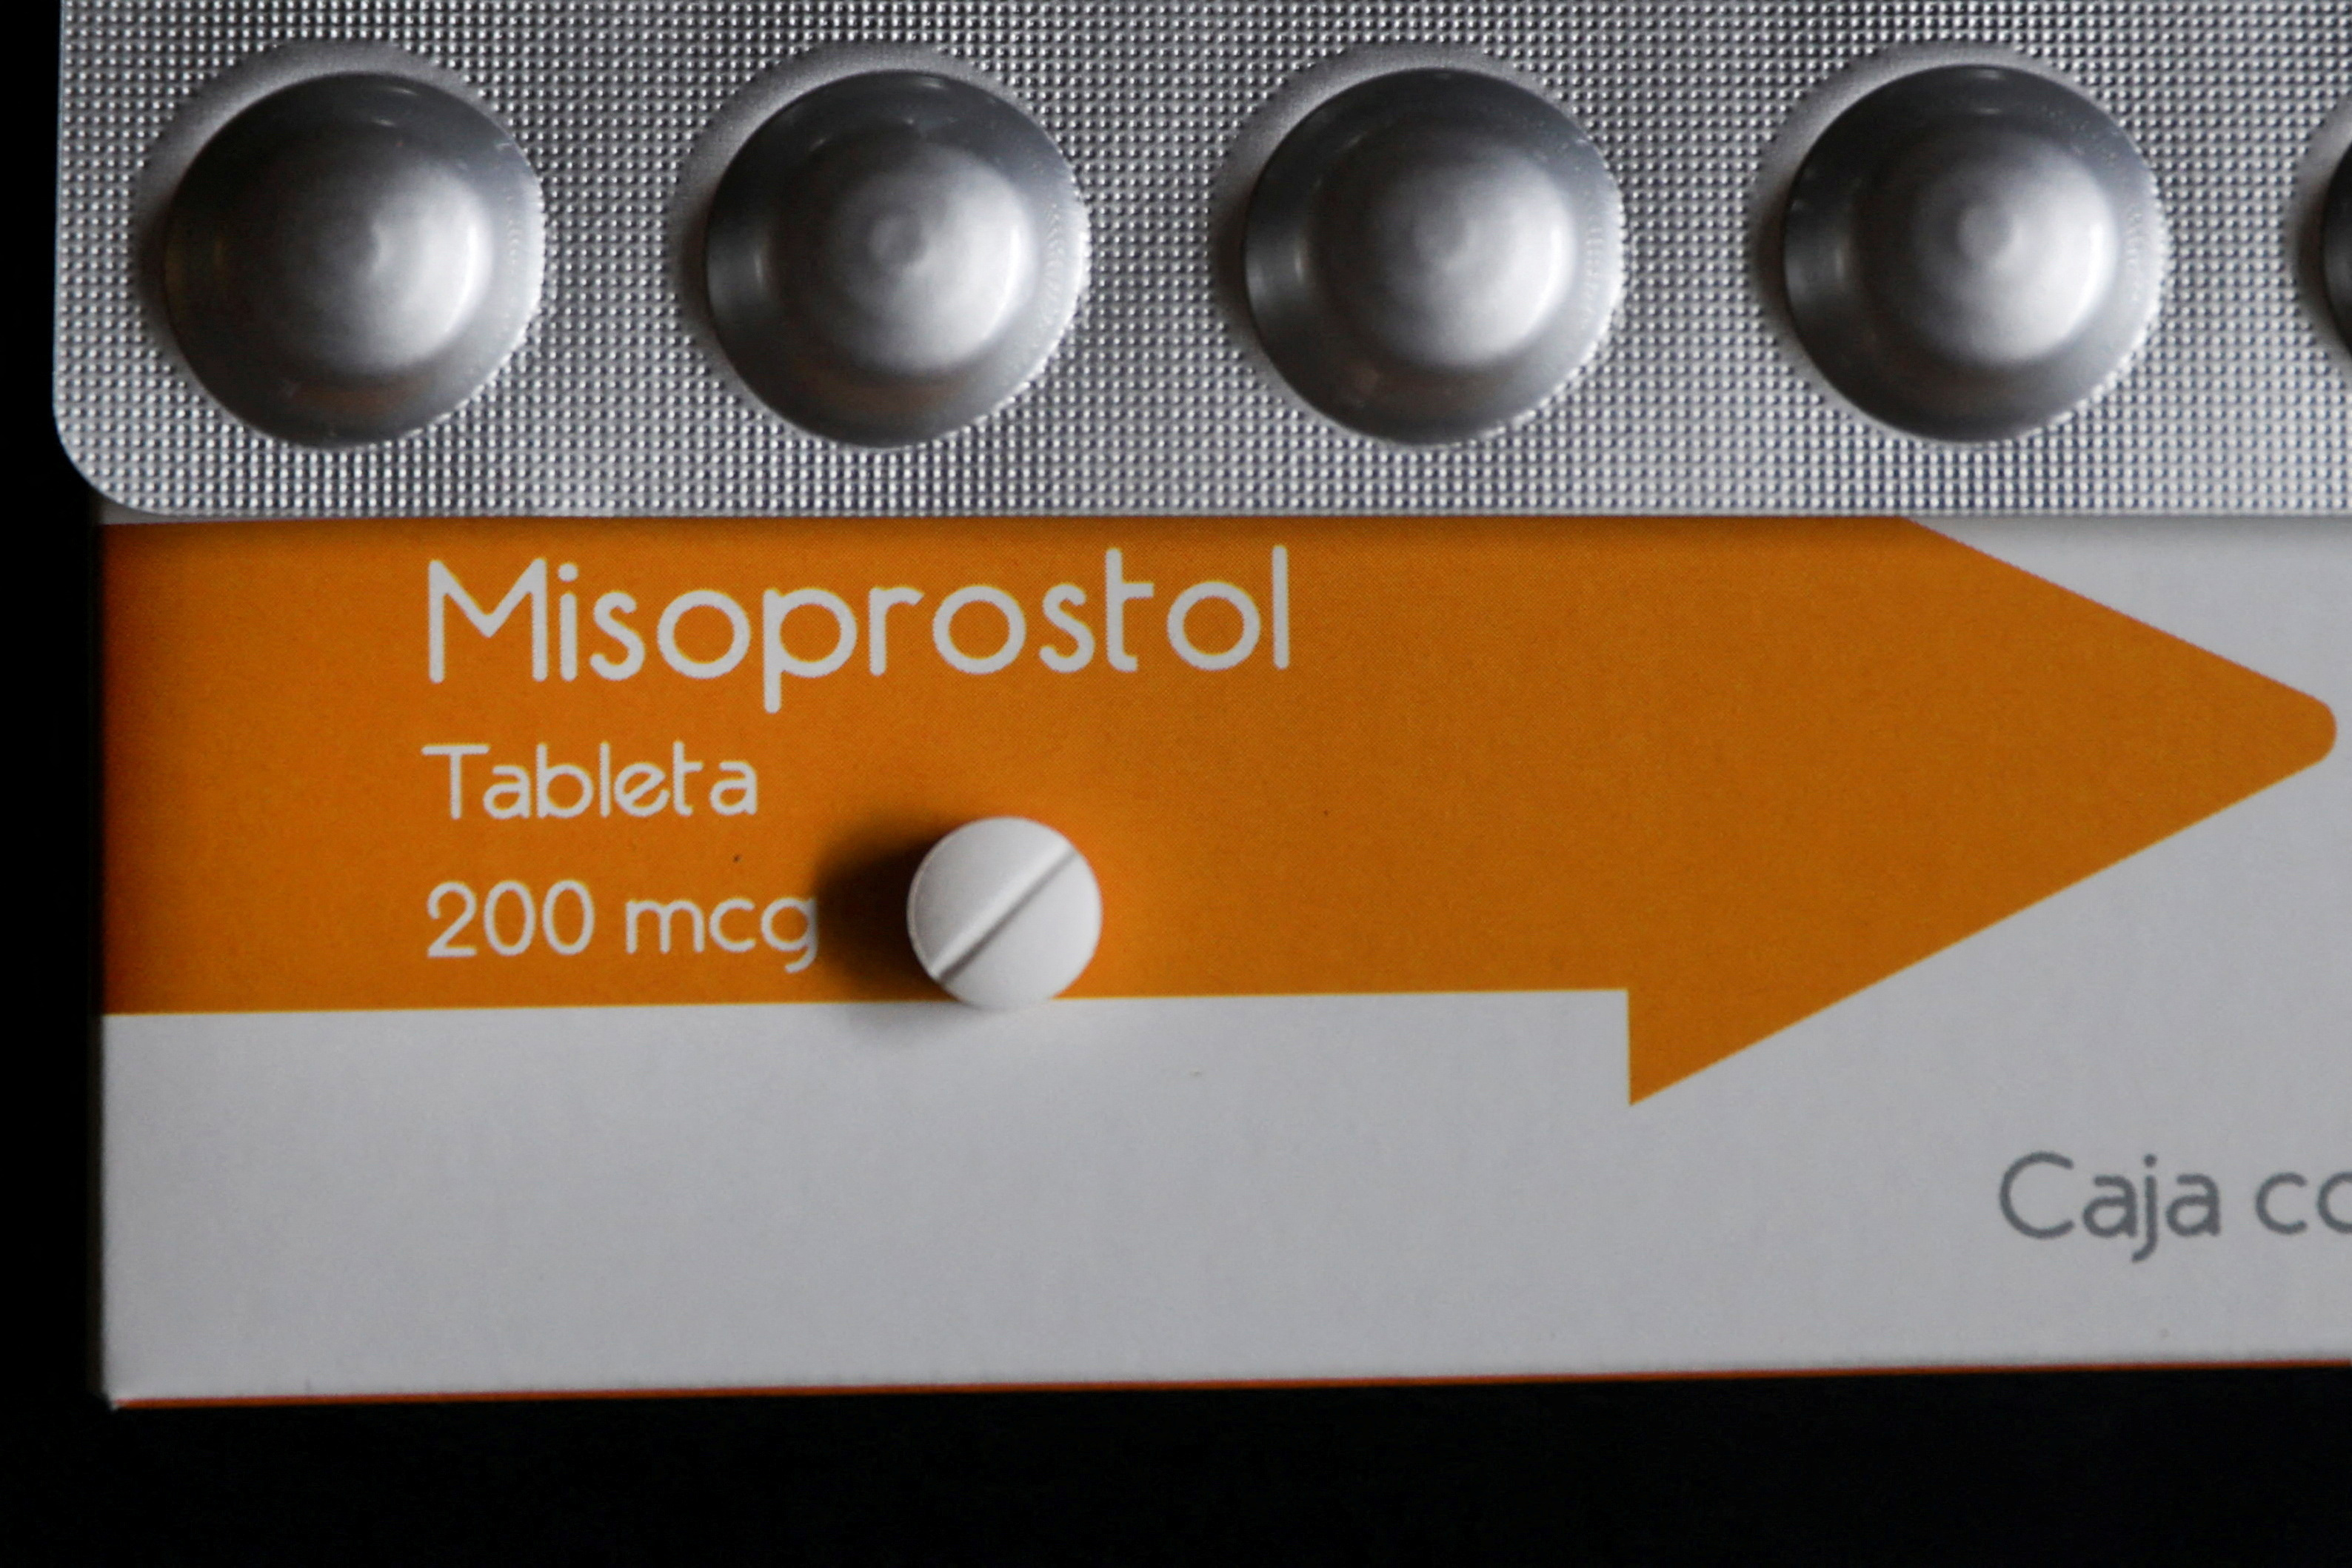 A pill of Misoprostol, used to terminate early pregnancies, is pictured in this illustration